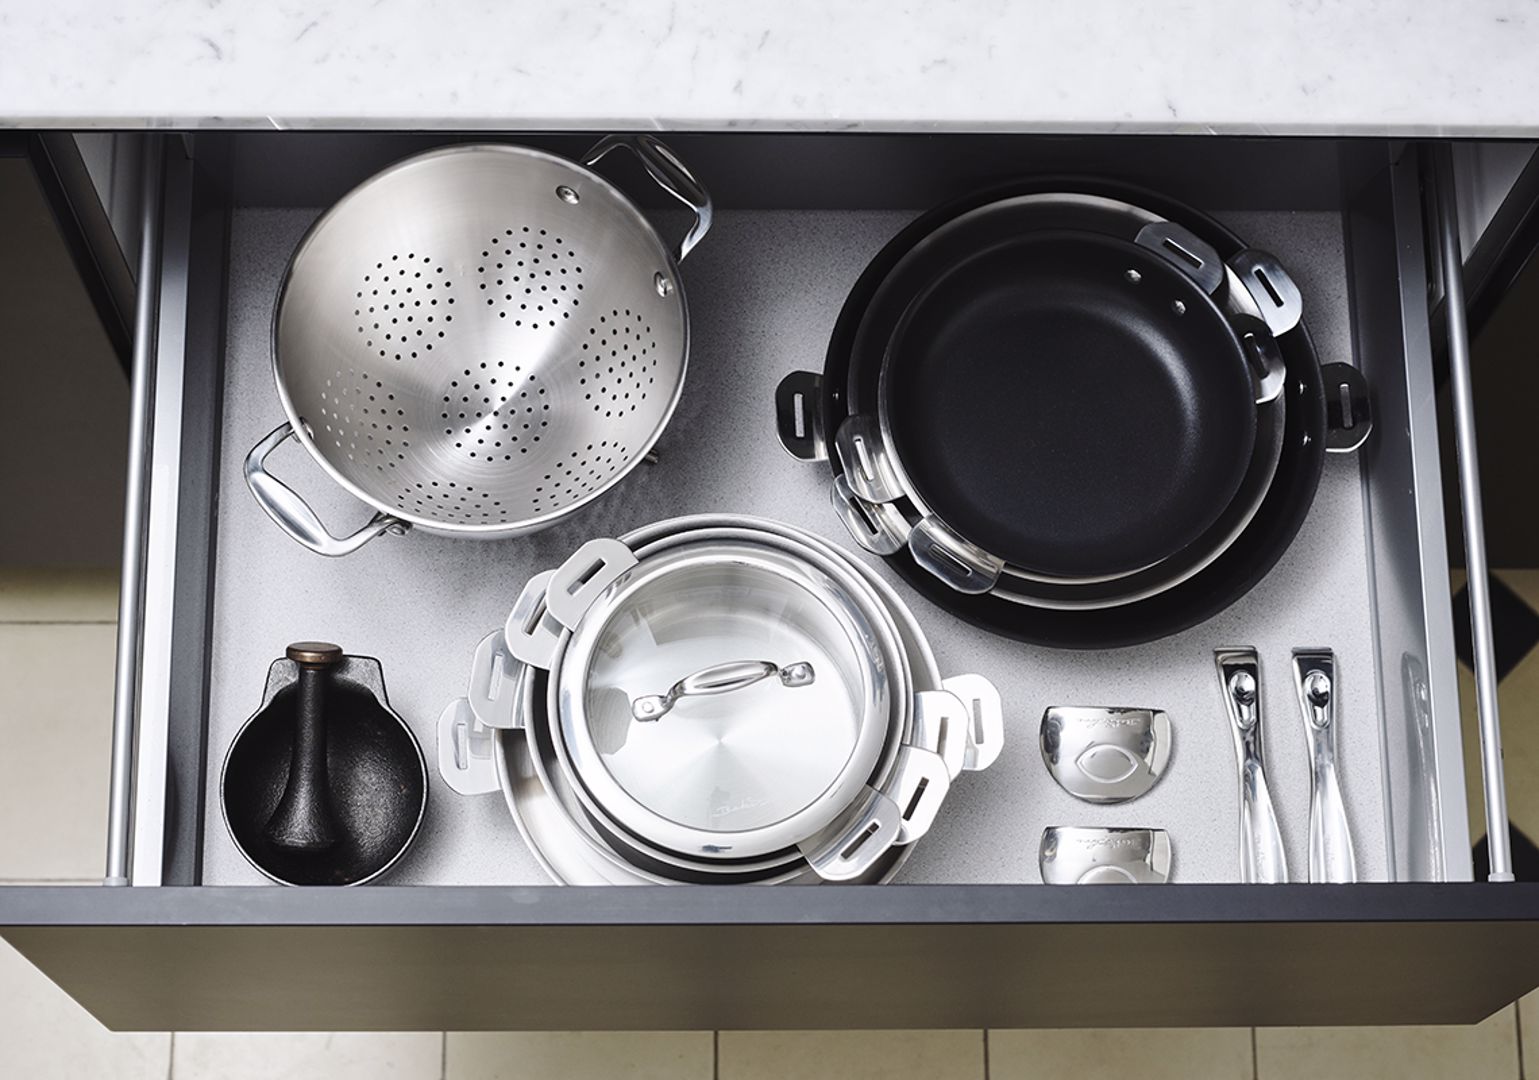 Compact quality cookware with the Evolution collection